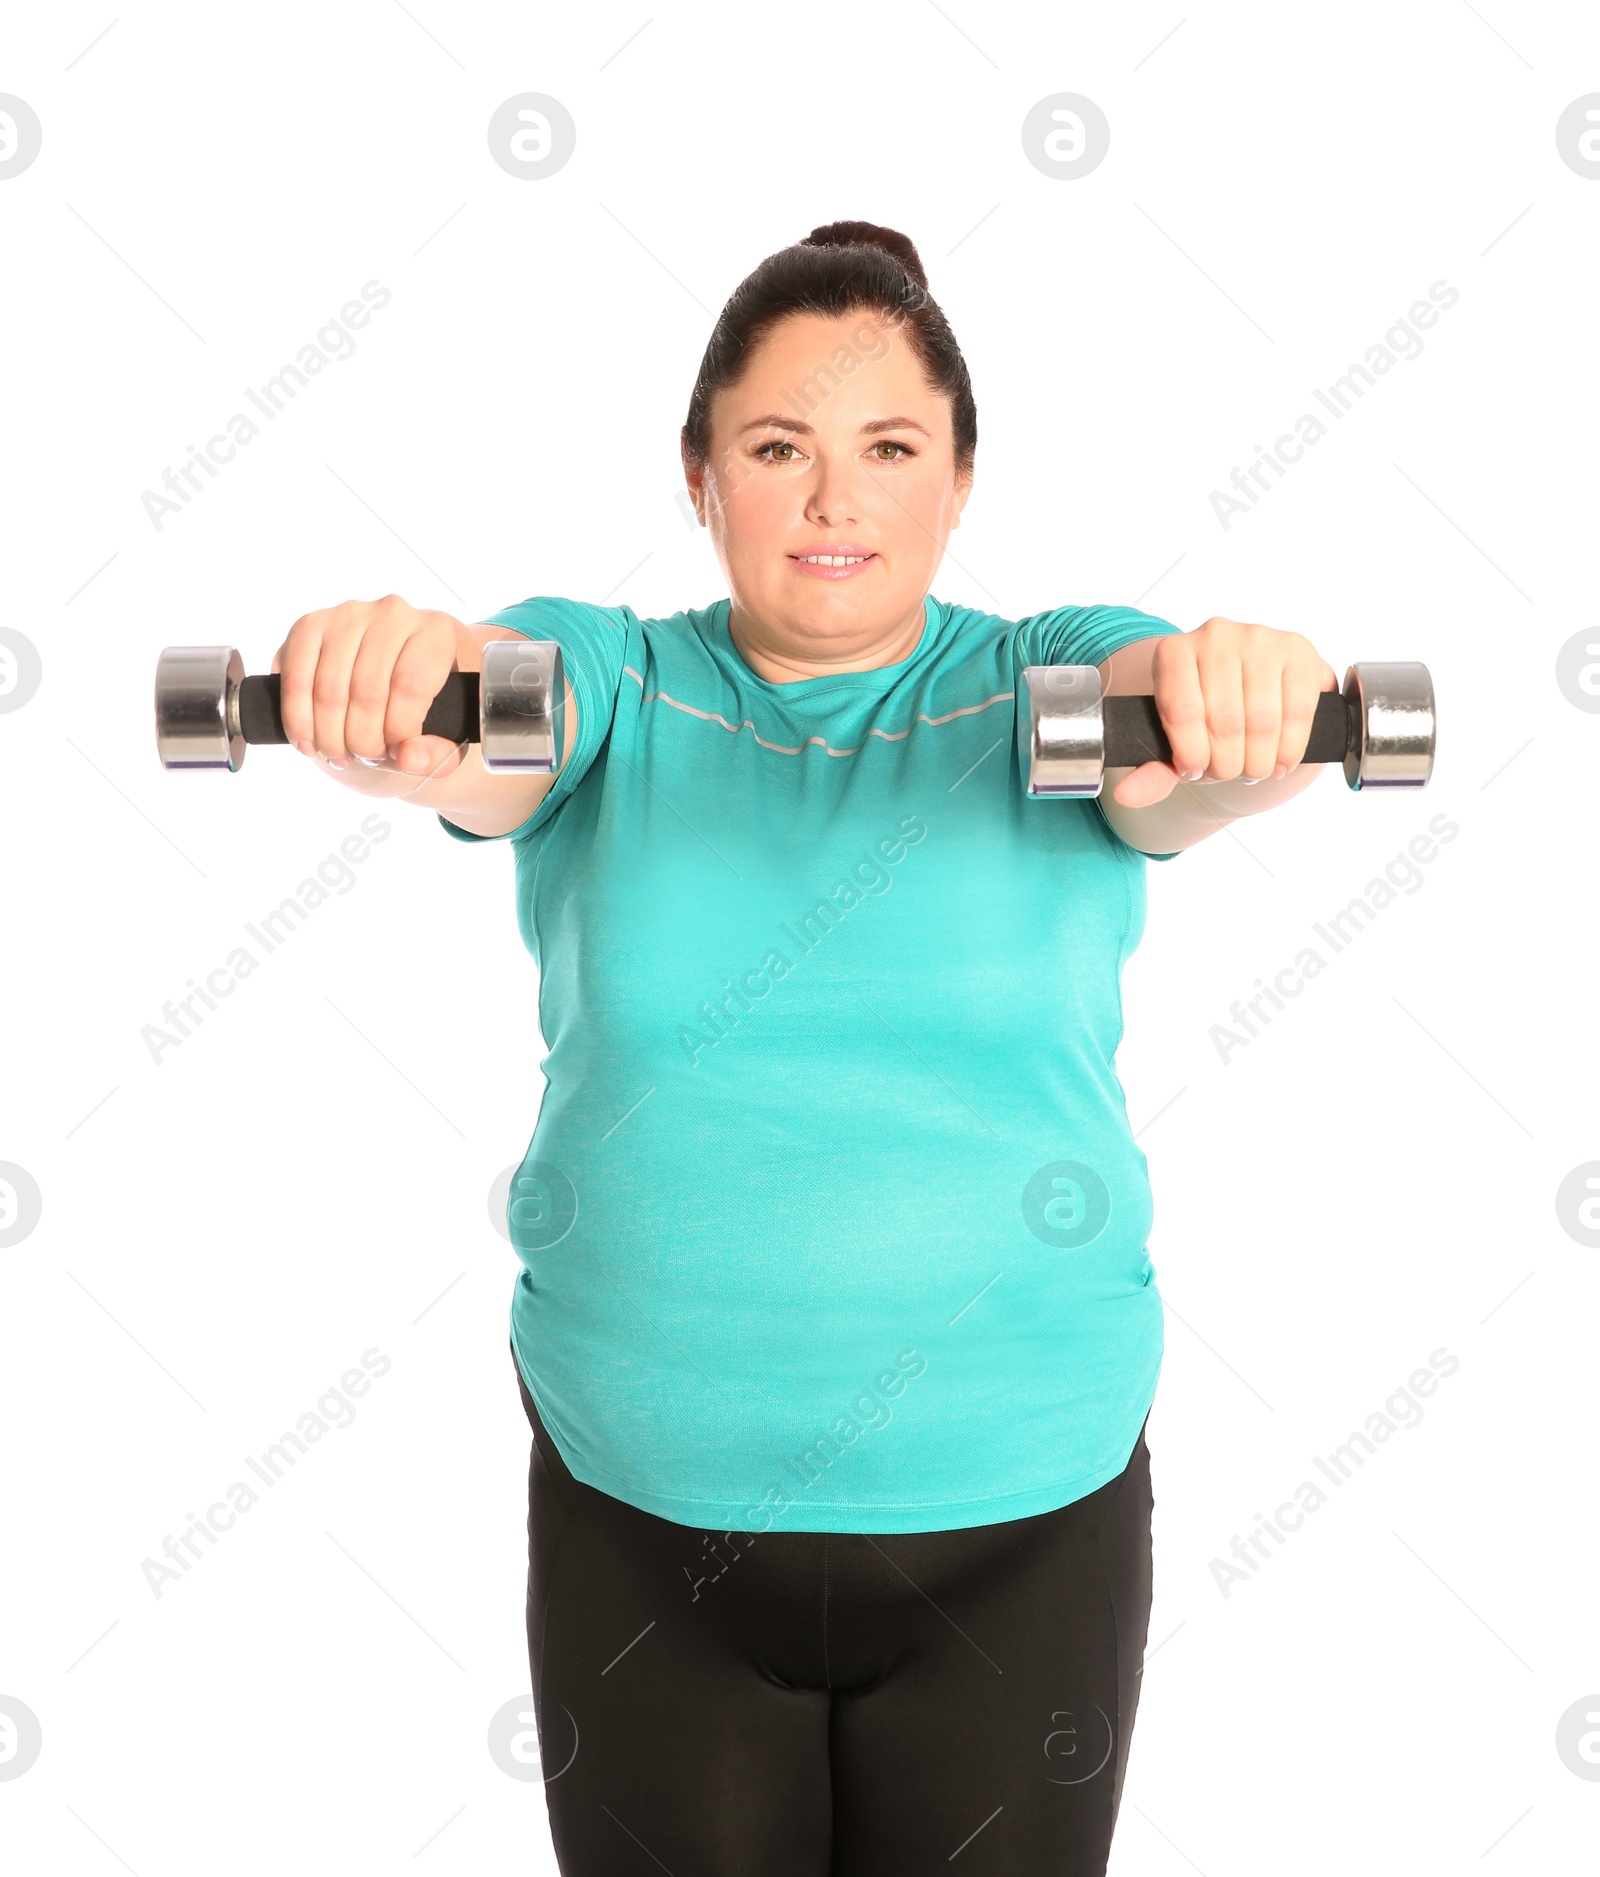 Photo of Overweight woman doing exercise with dumbbells on white background